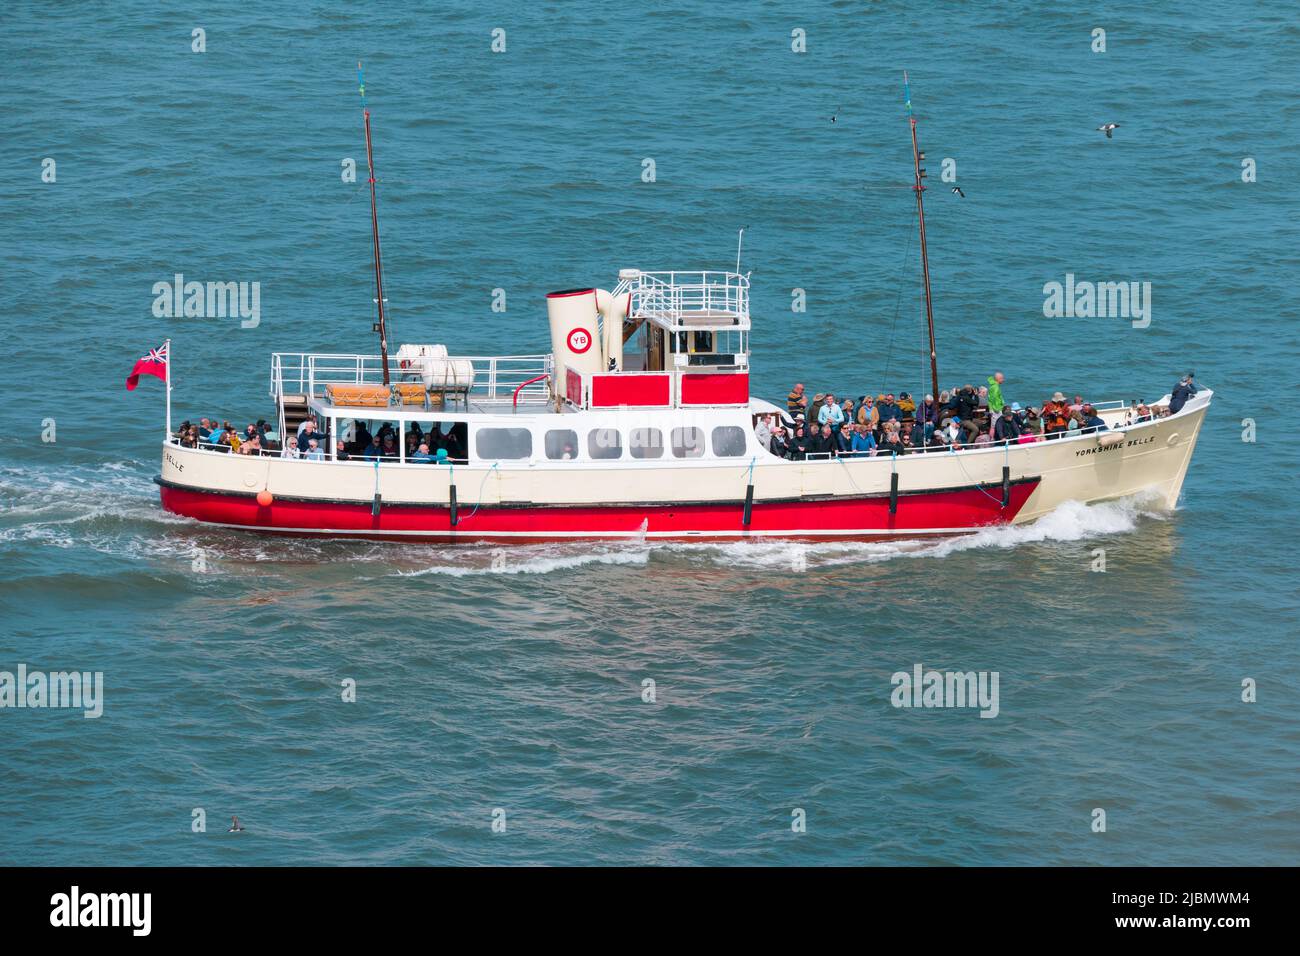 Yorkshire Belle, a pleasure cruiser boat, at sea with tourists in sunshine around Bridlington Stock Photo